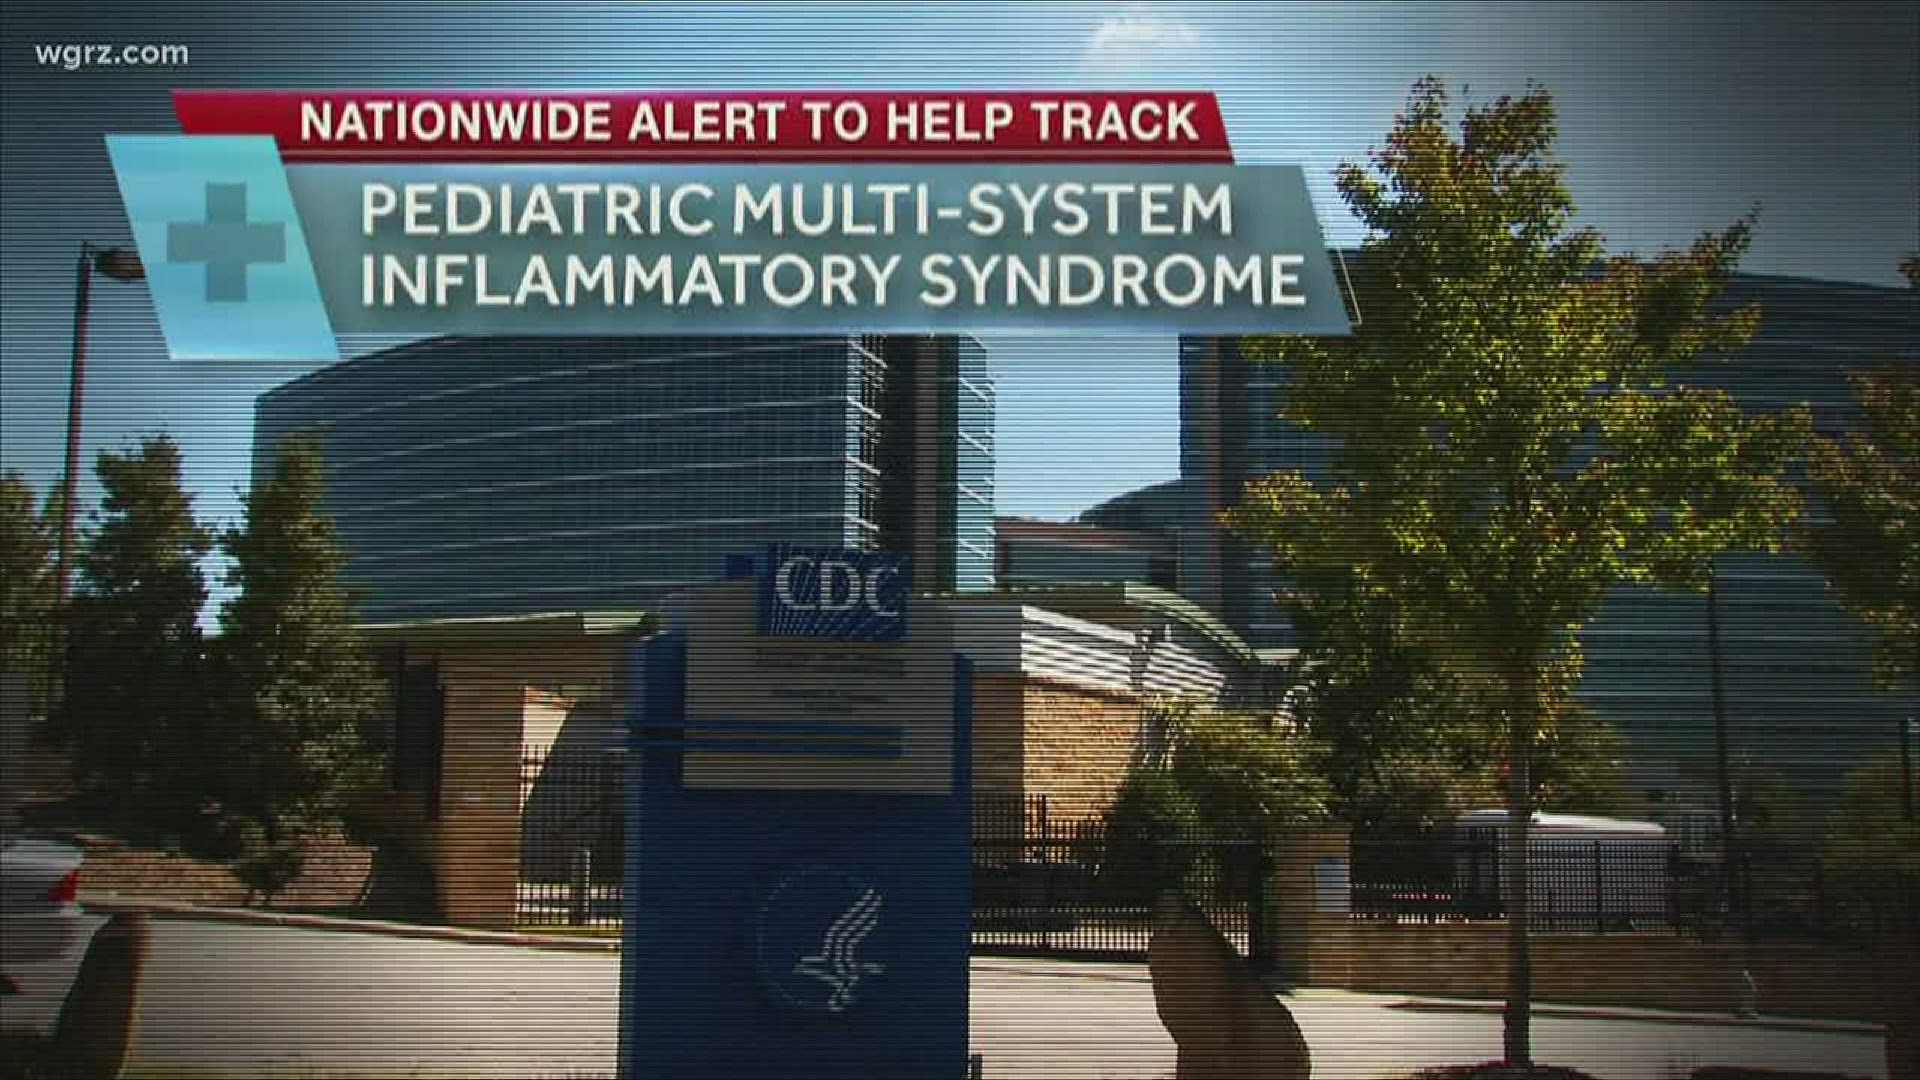 Gov. Andrew Cuomo said the New York State Department of Health is looking into young people developing an illness that could be connected to COVID-19.